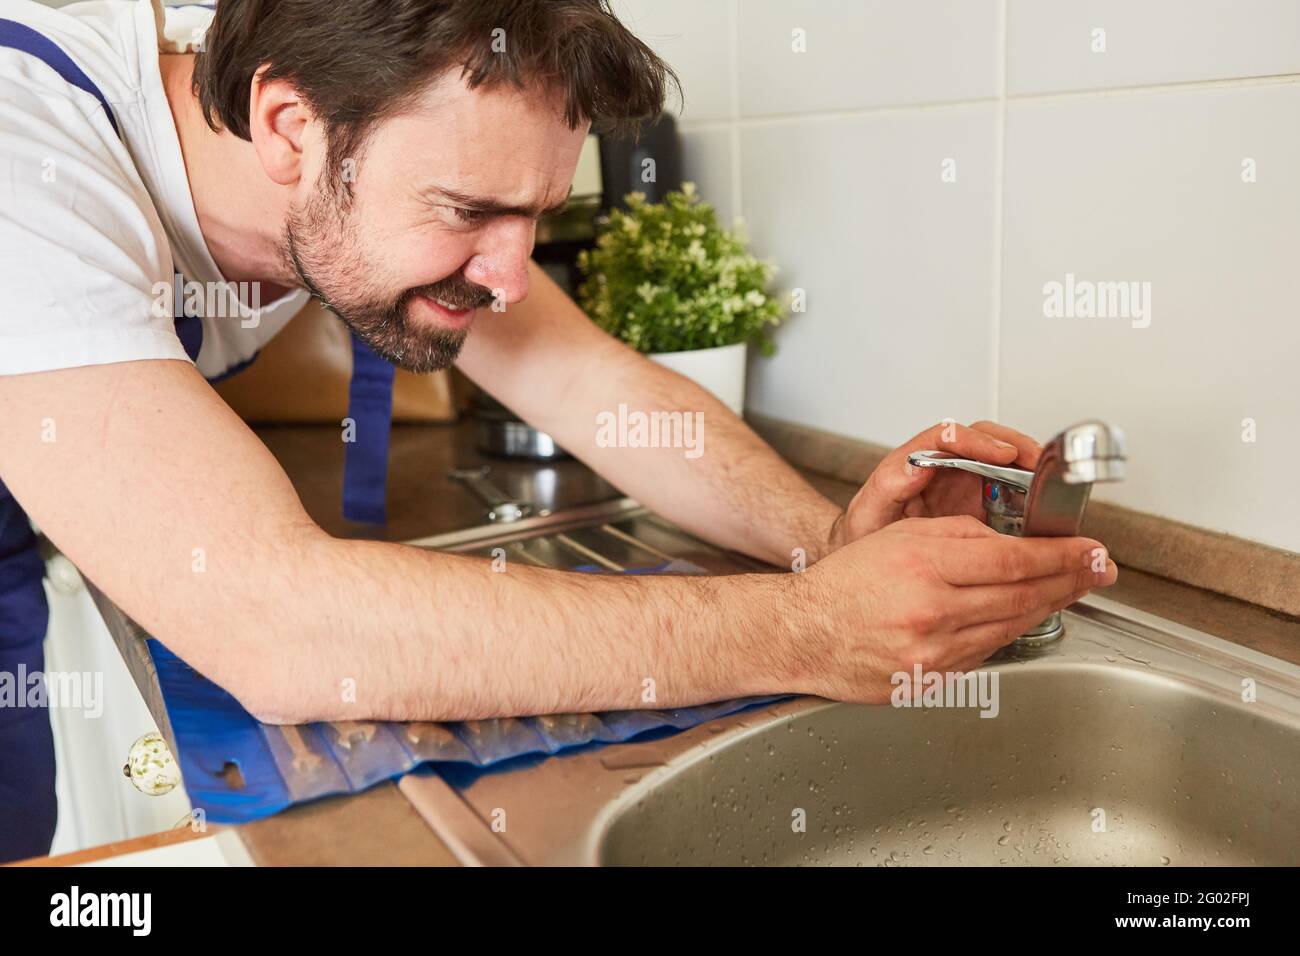 Do-it-yourselfer or plumber repairs the tap on the sink in the kitchen Stock Photo